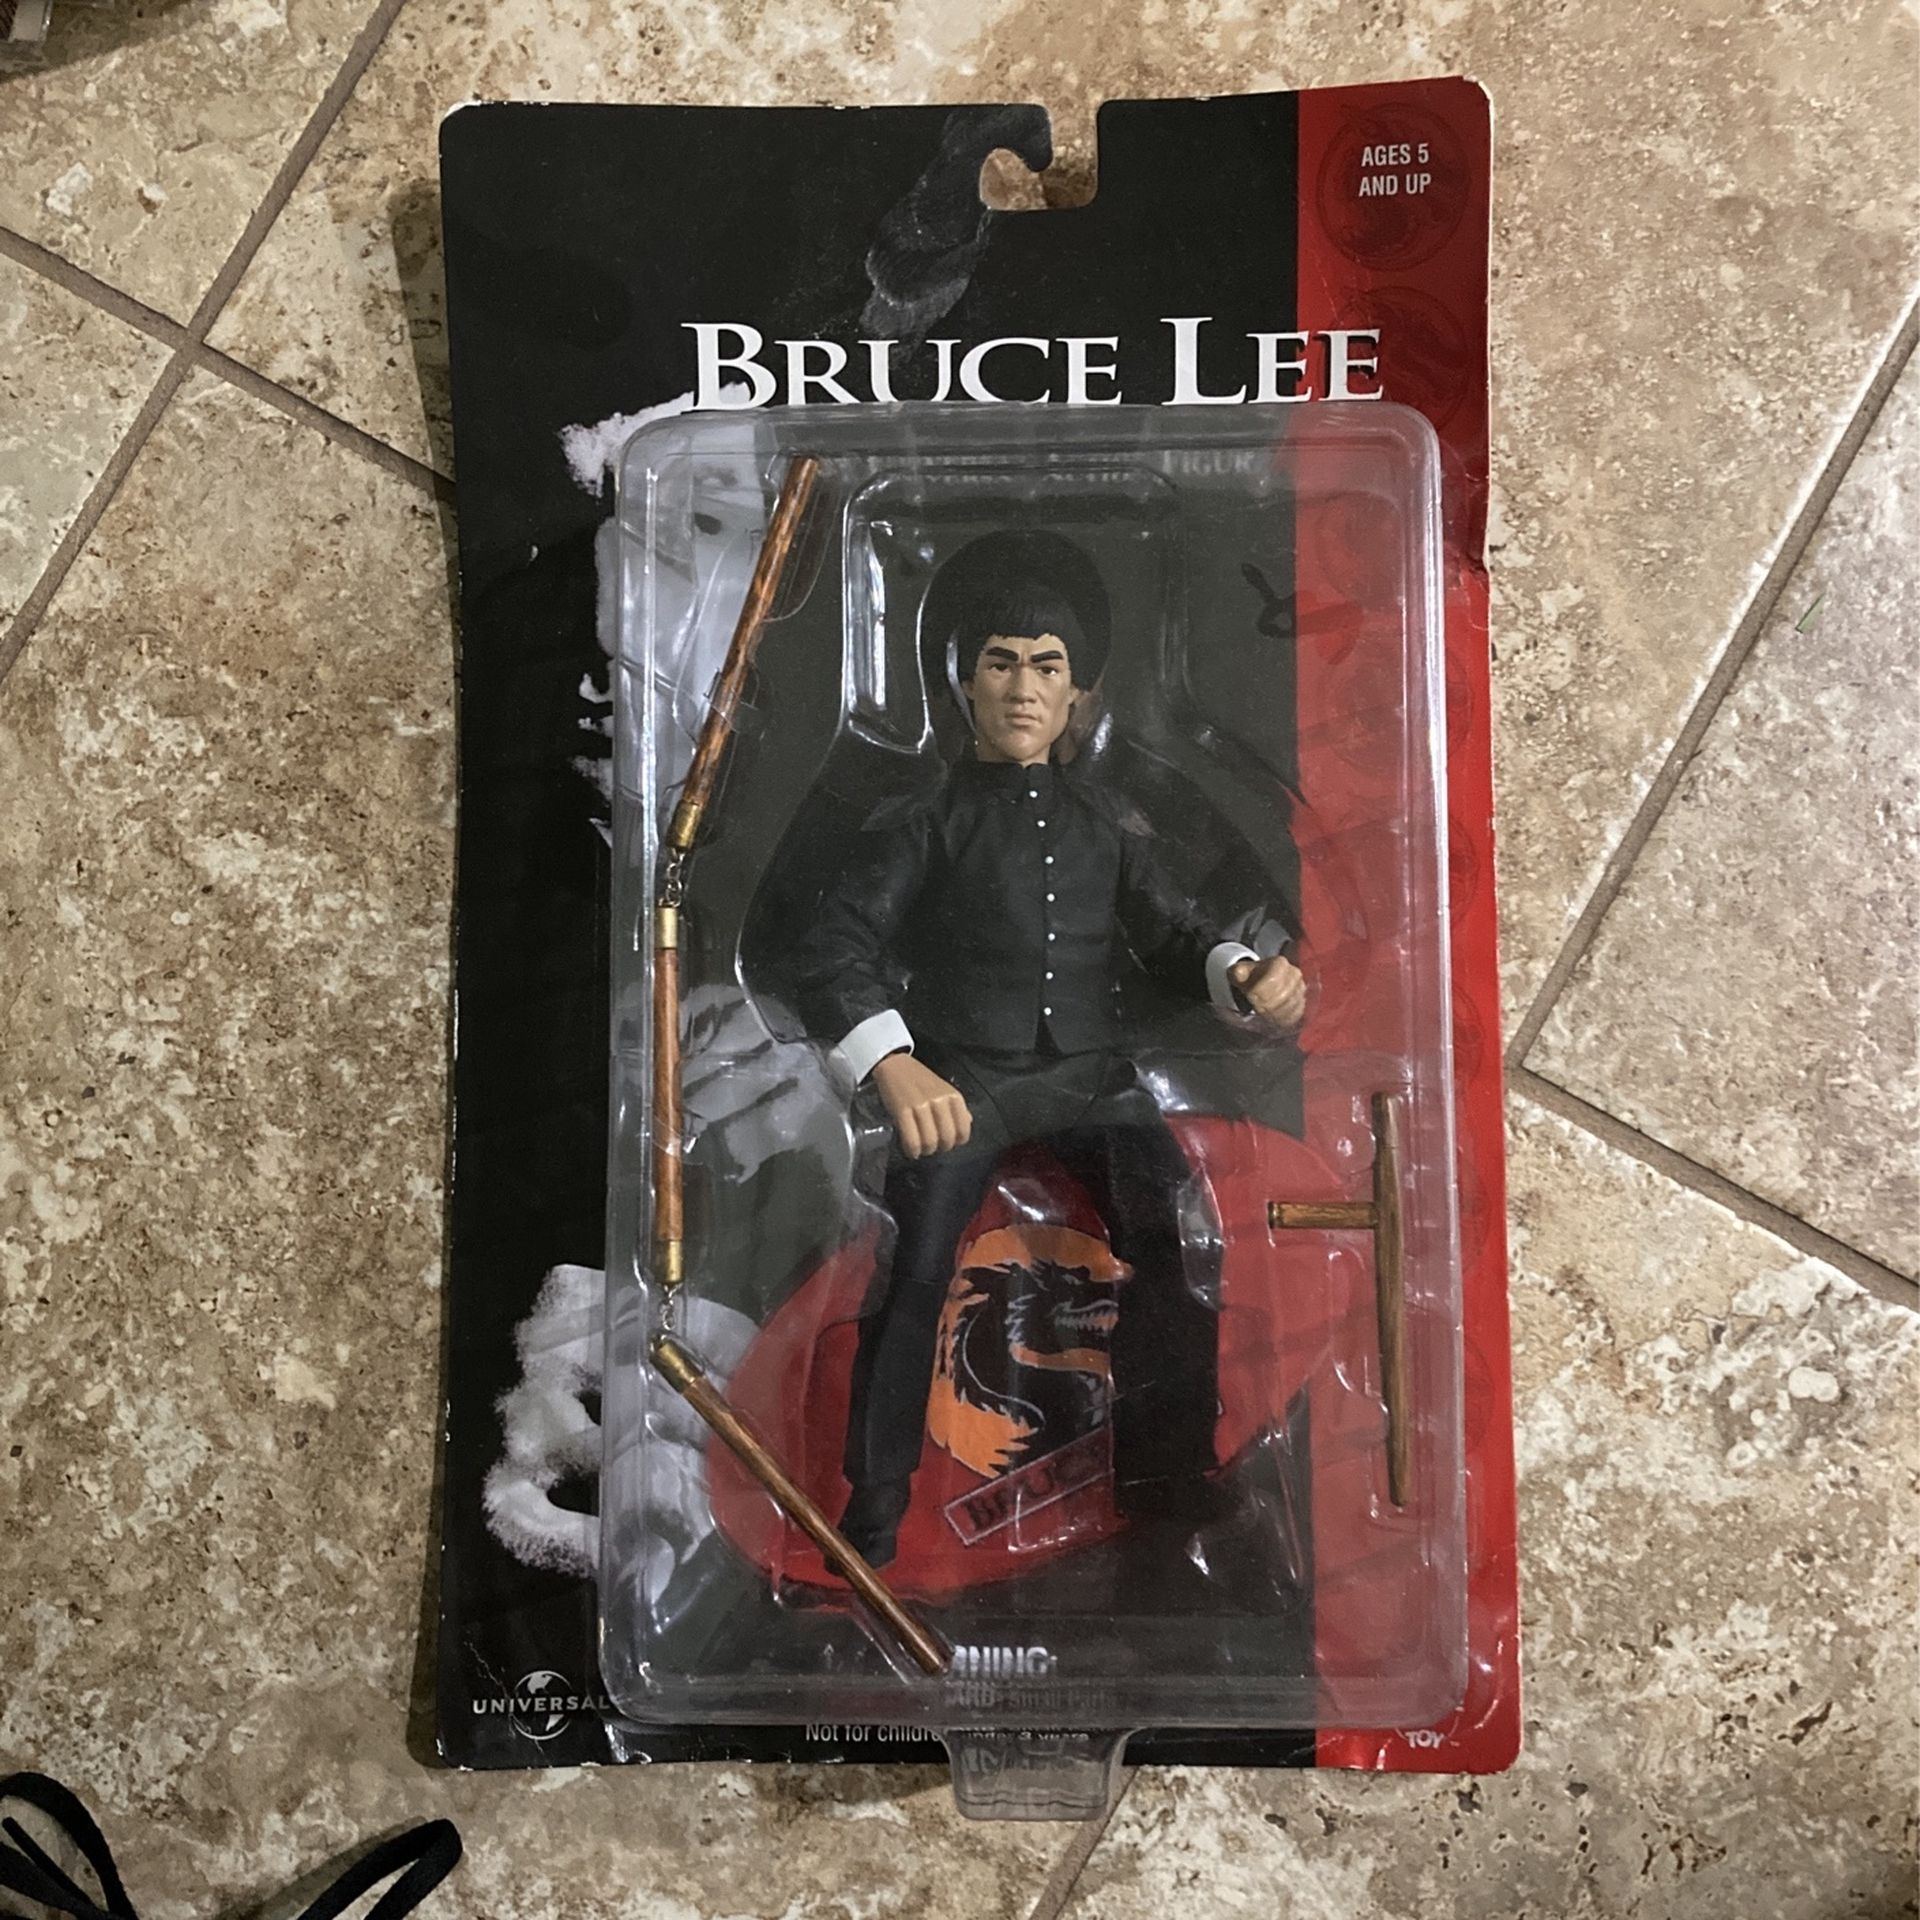 Bruce Lee - The Universal Action Figure